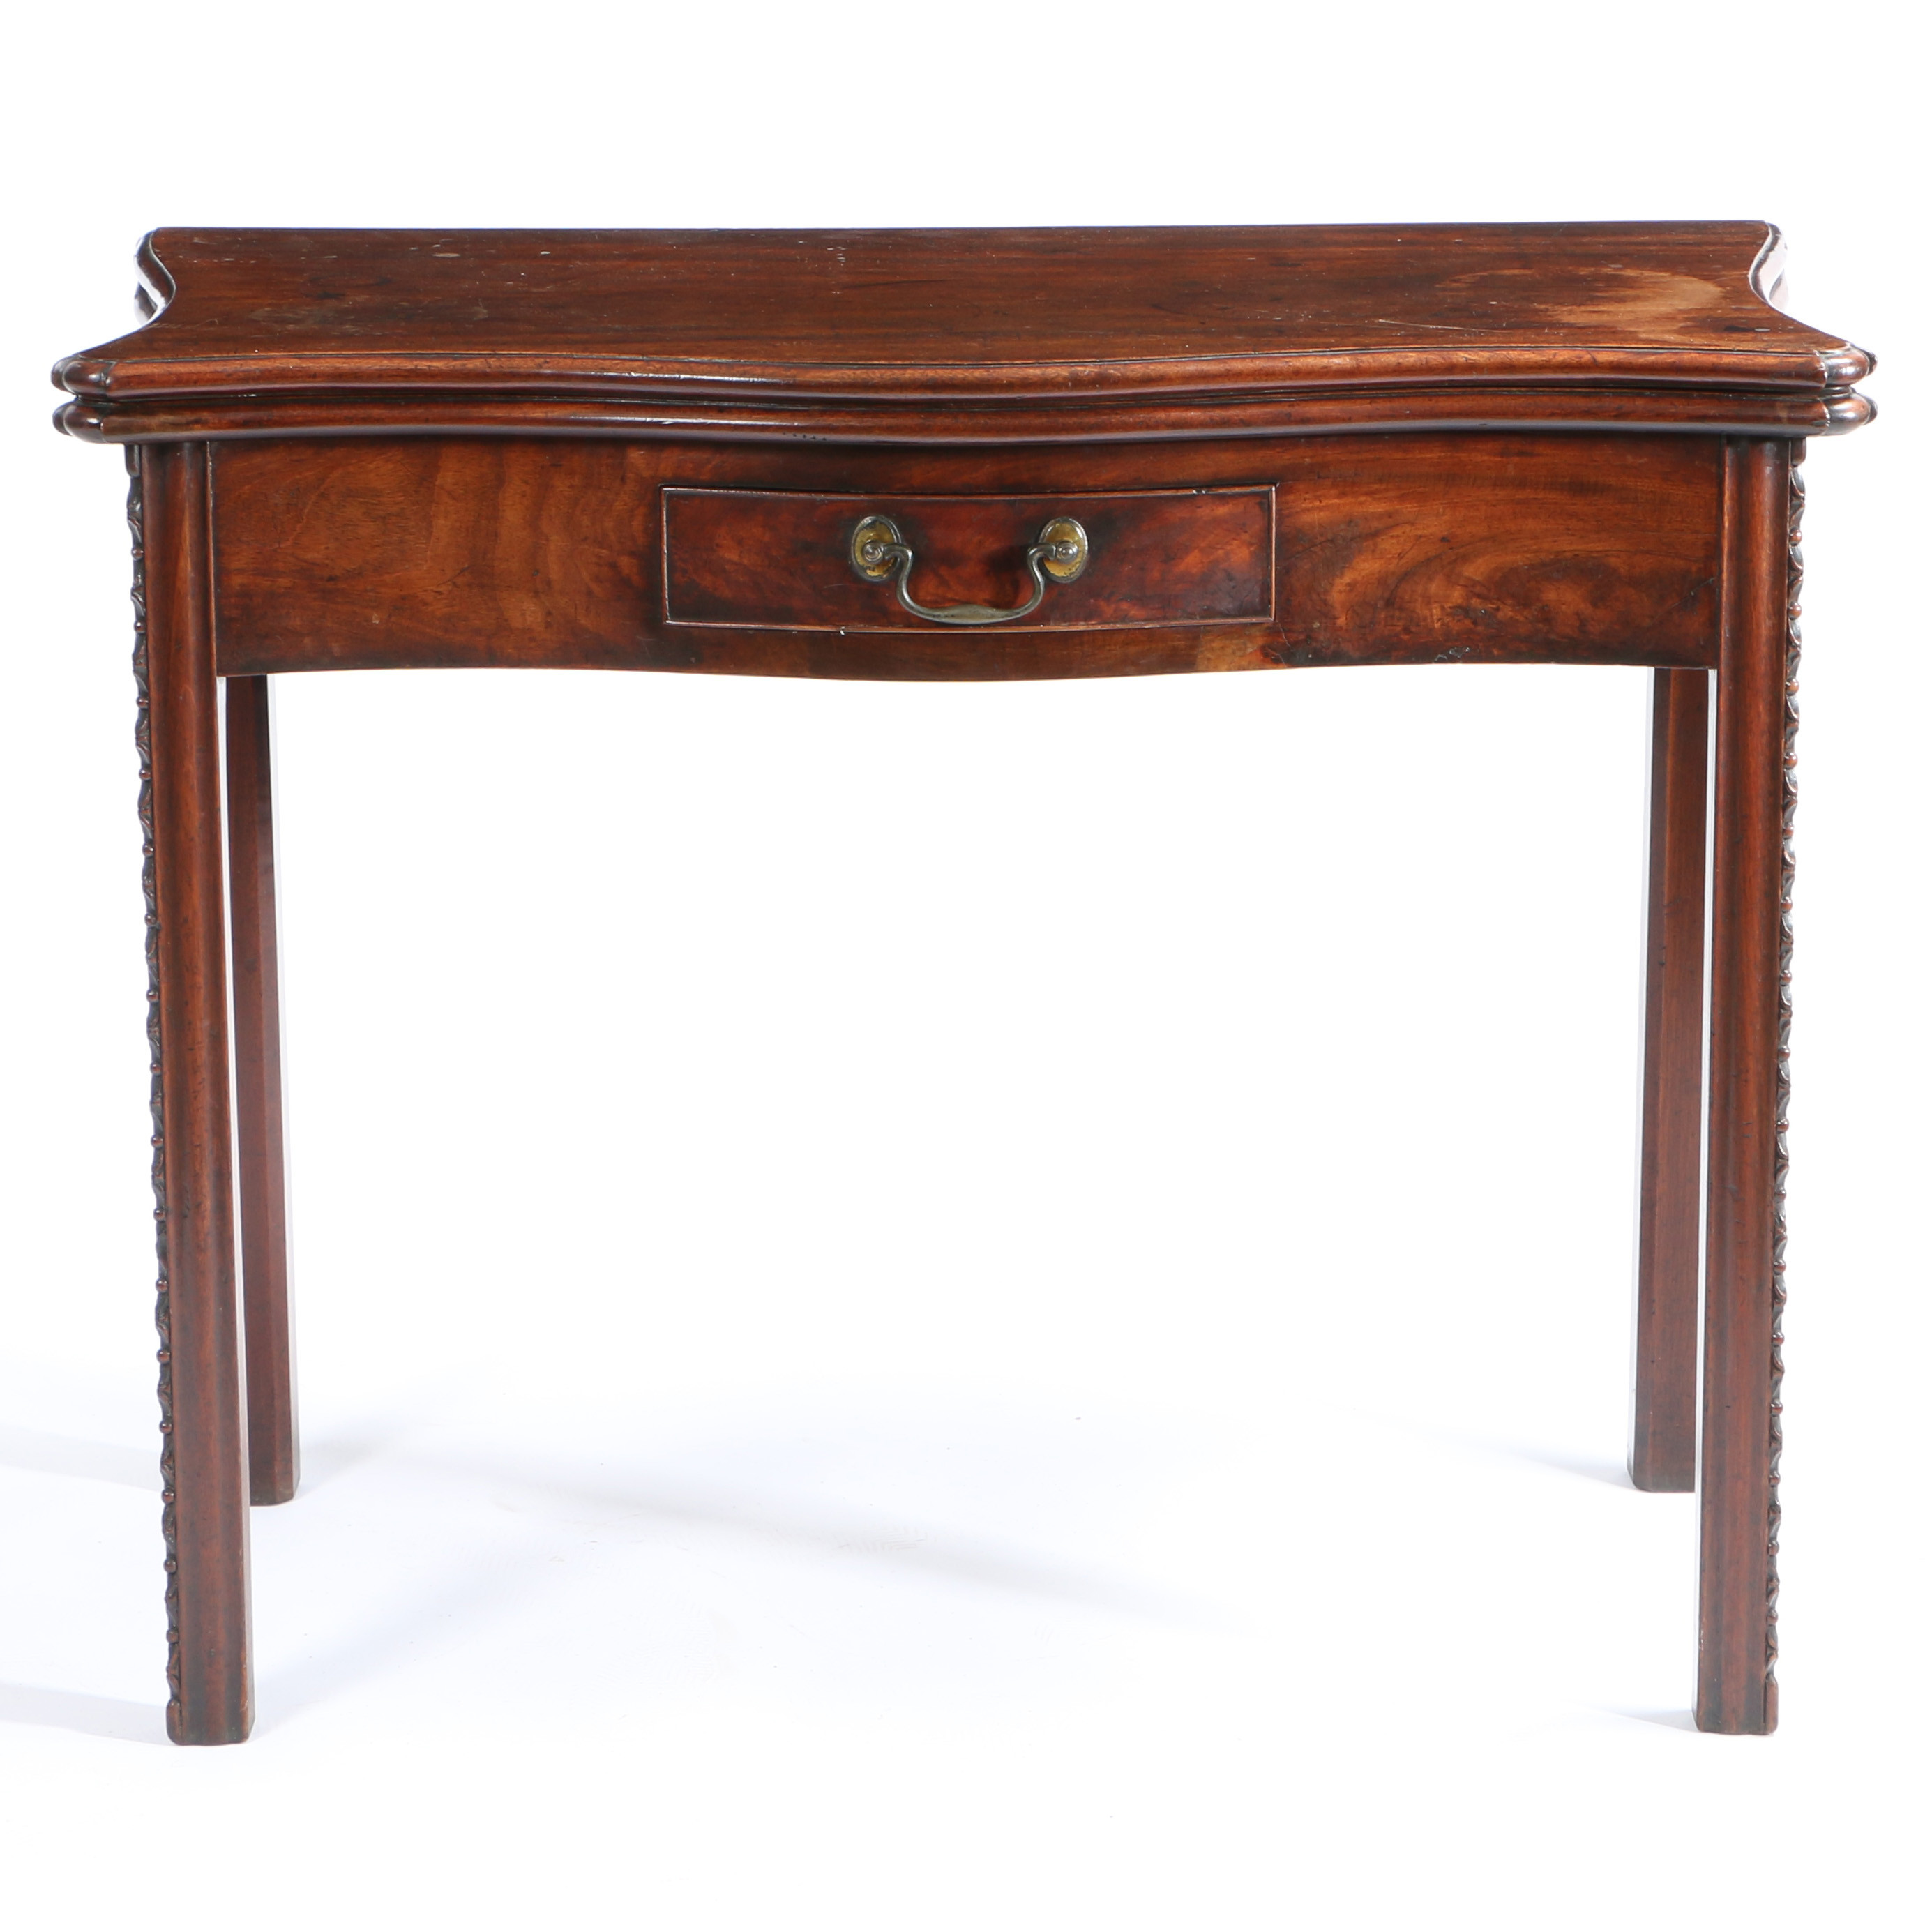 A 19TH CENTURY MAHOGANY CHIPPENDALE STYLE TEA TABLE. - Image 2 of 4